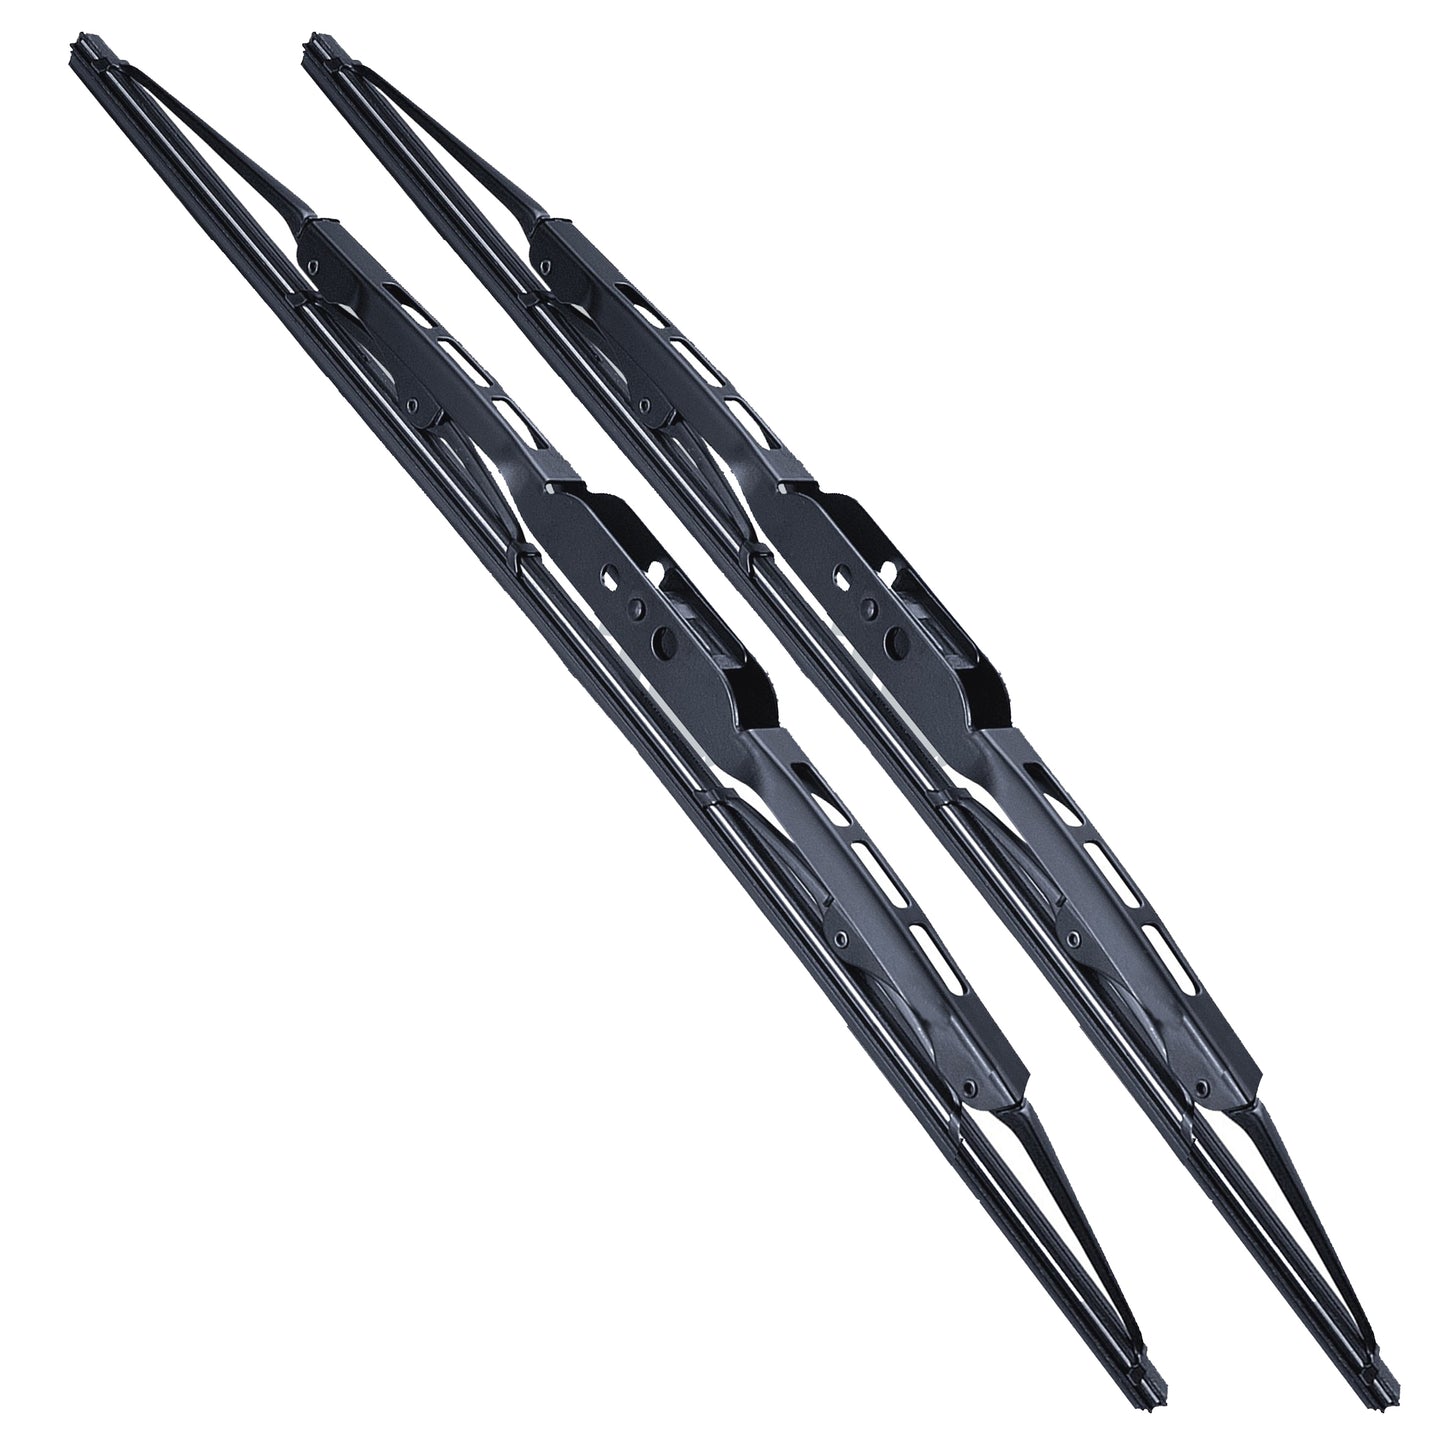 TOYOTA SUPRA Coupe Jan 1986 to May 1993 Wiper Blade Kit